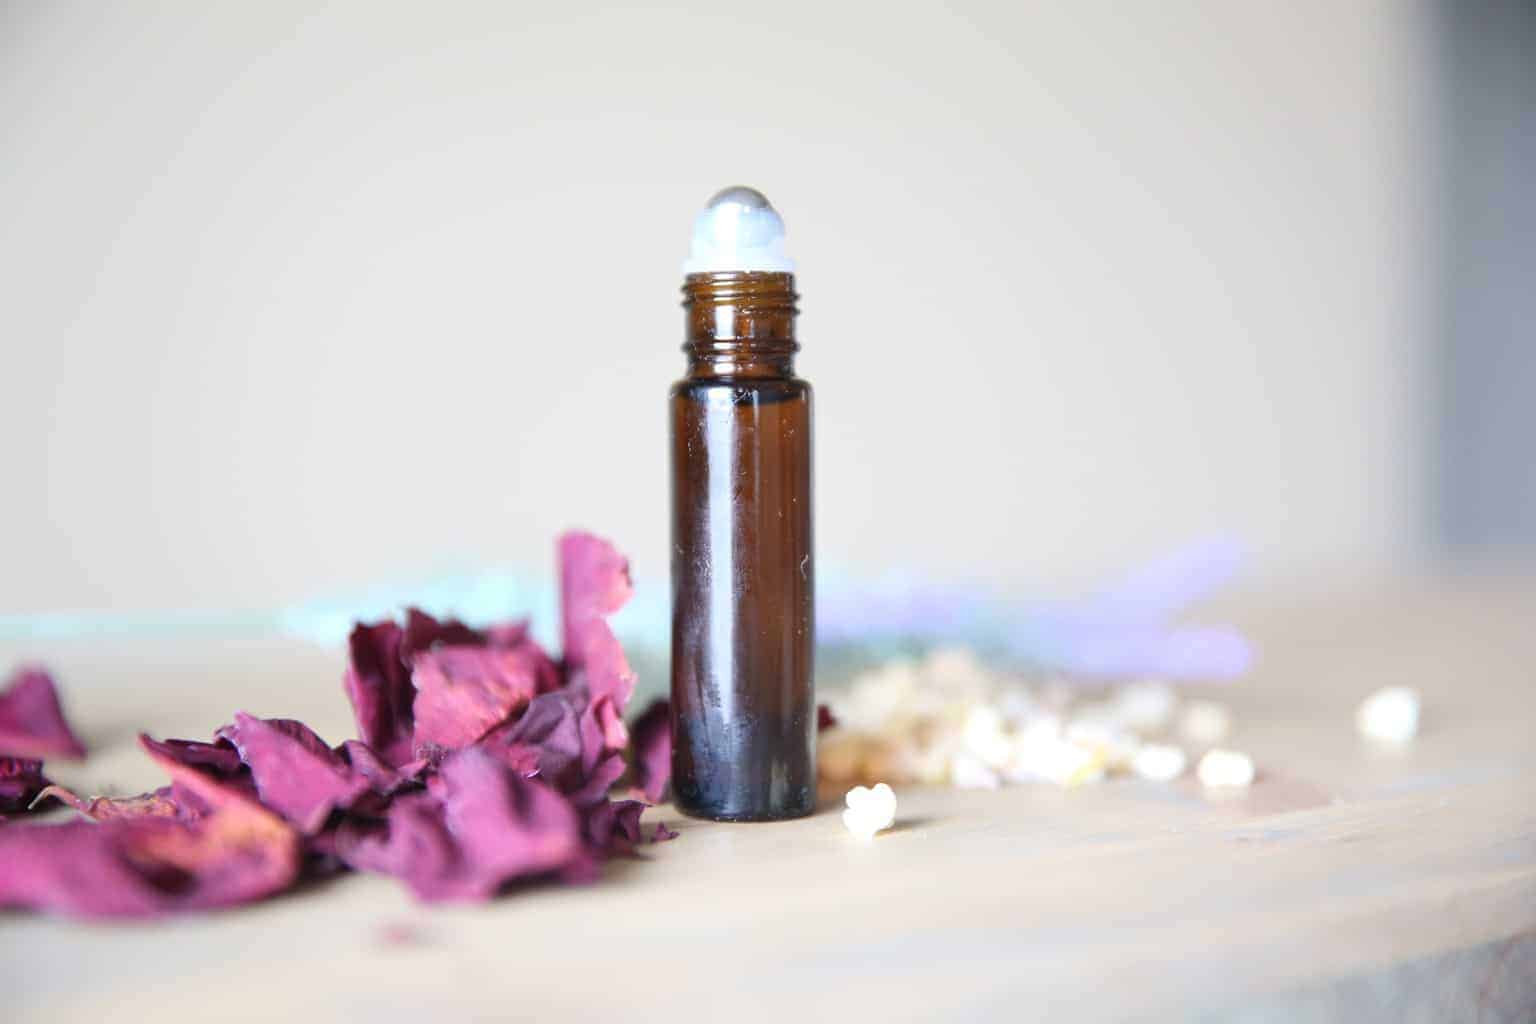 anti-aging roller bottle with dried rose petals